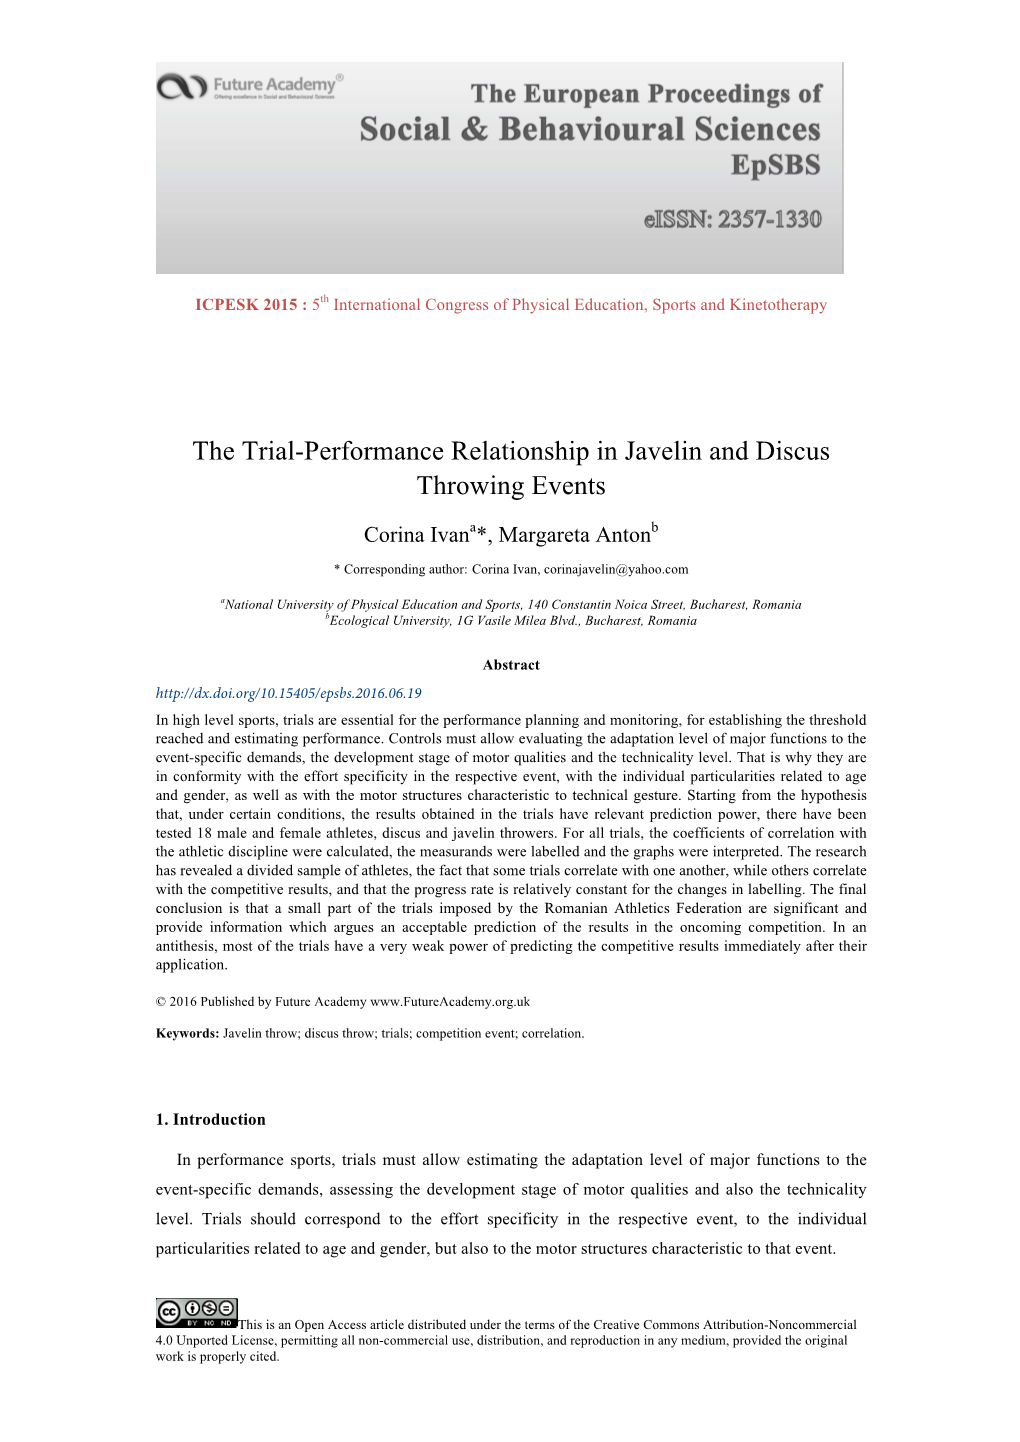 The Trial-Performance Relationship in Javelin and Discus Throwing Events